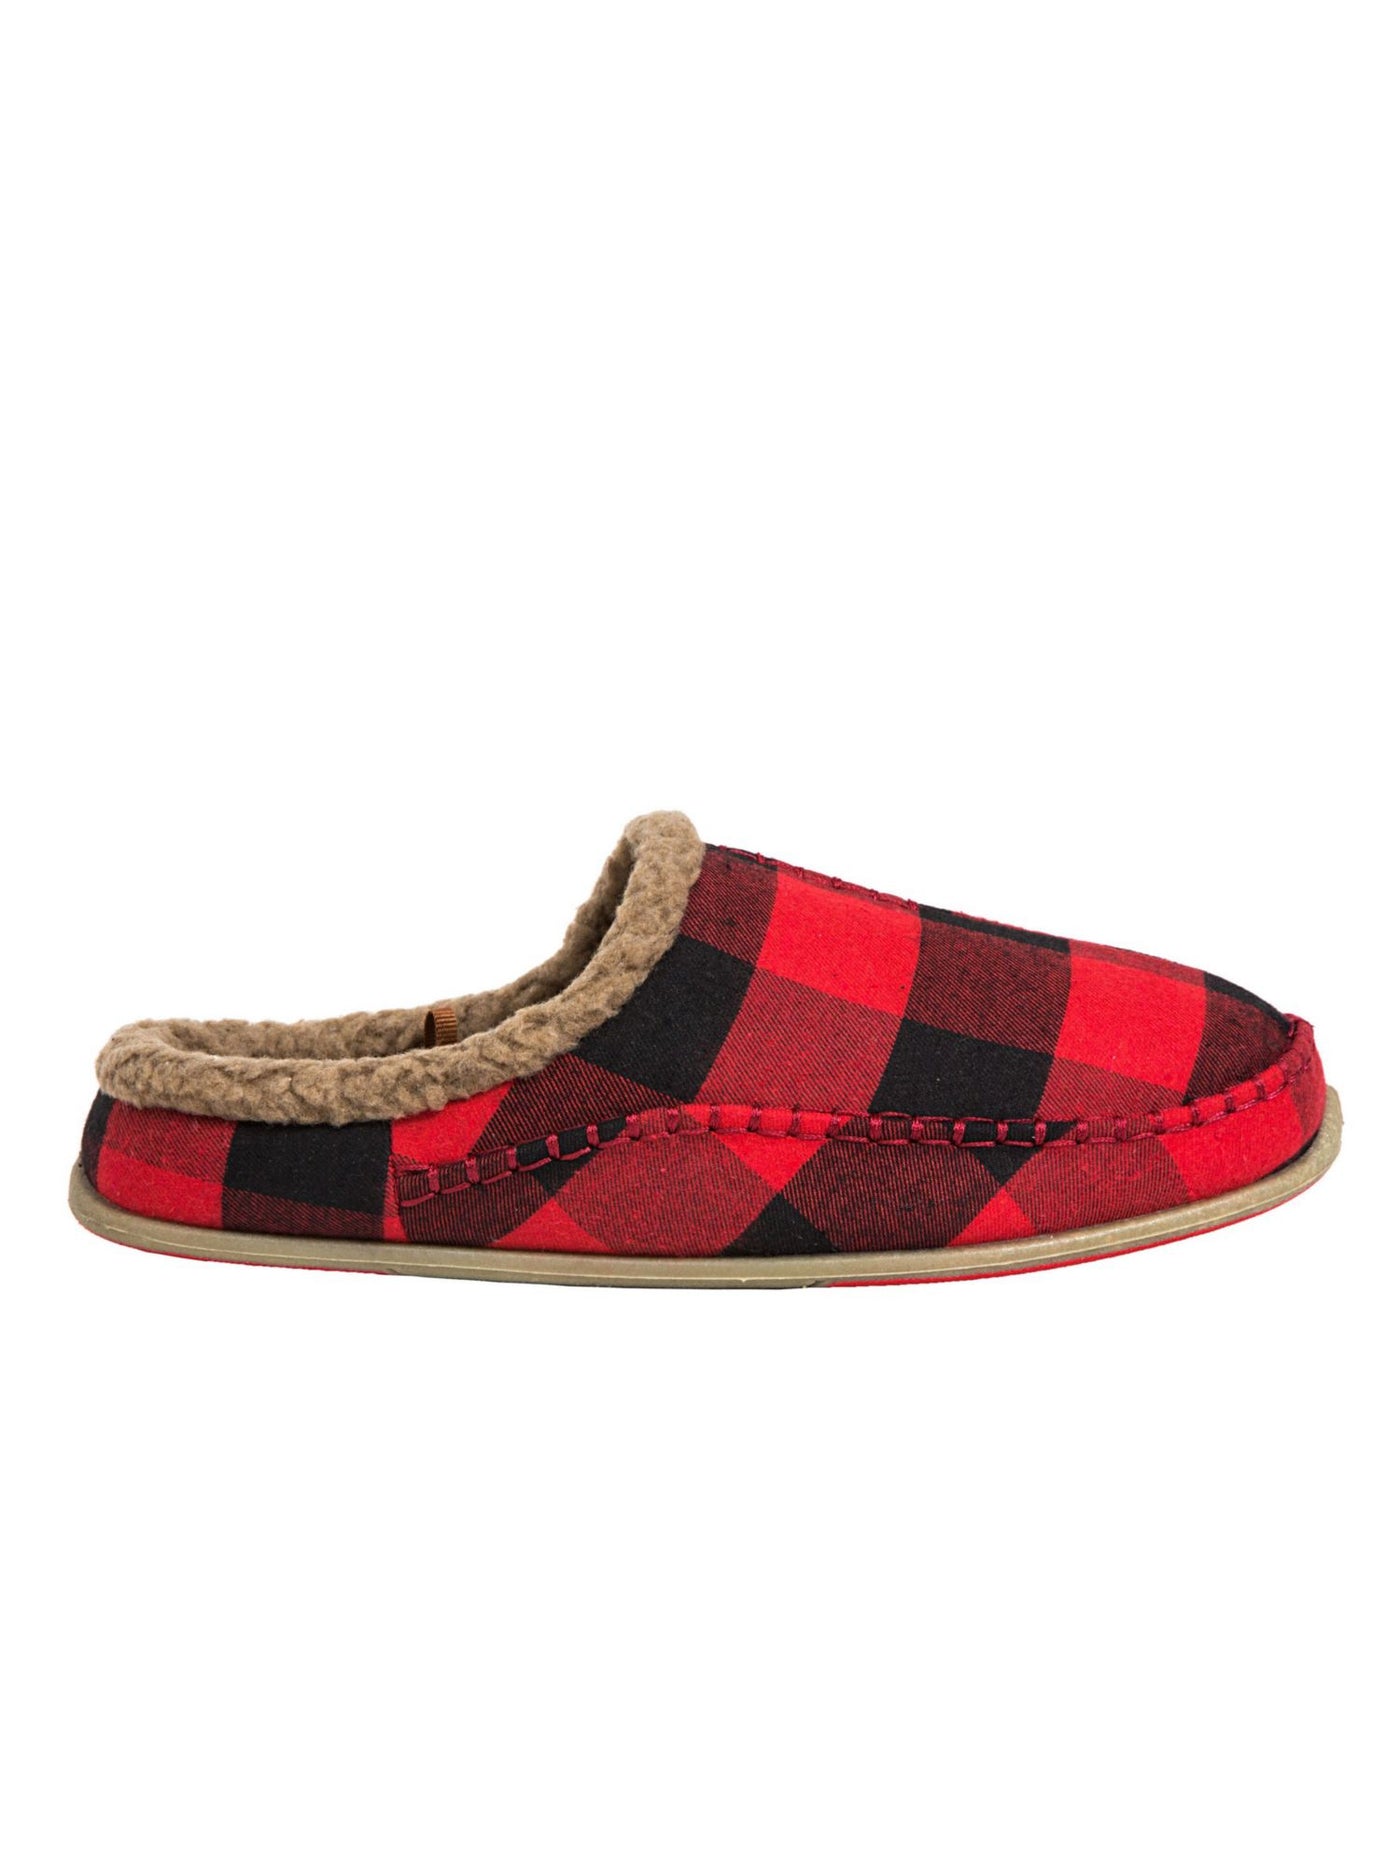 DEER STAGS SLIPPEROOZ Mens Red Plaid Comfort Nordic Round Toe Platform Slip On Slippers Shoes 12 M